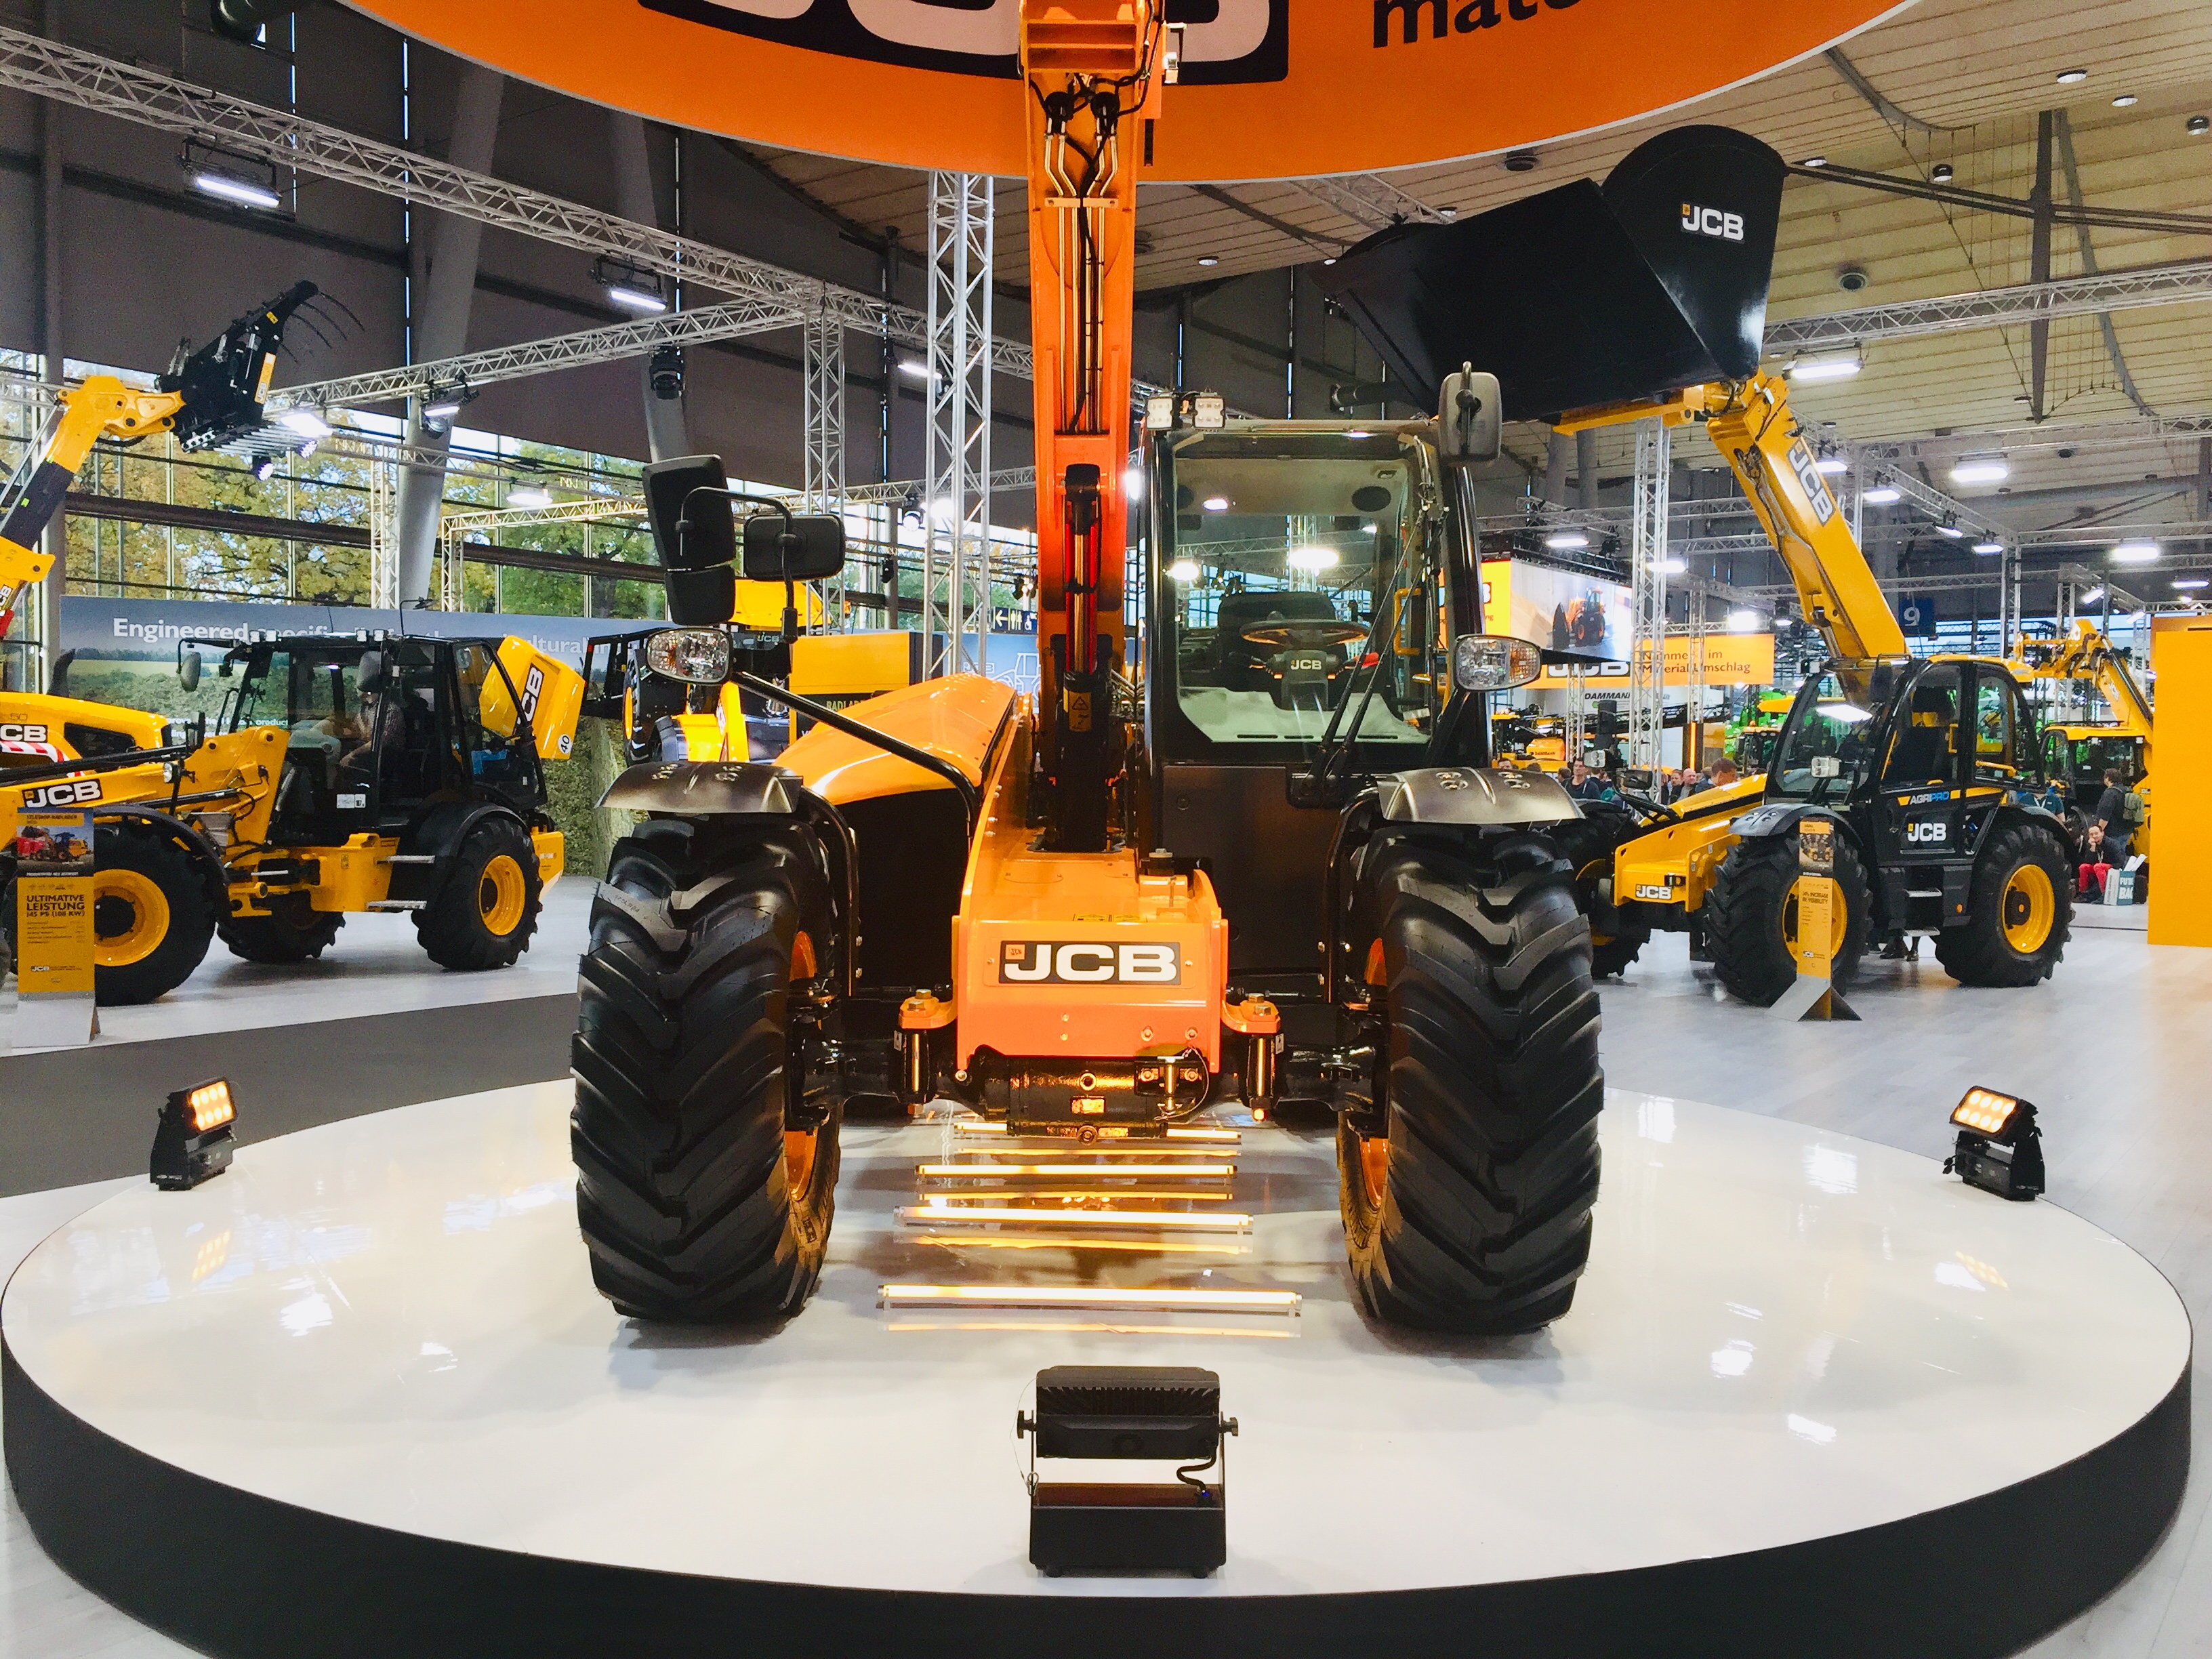 JCB on a revolving stage display at and exhibition.